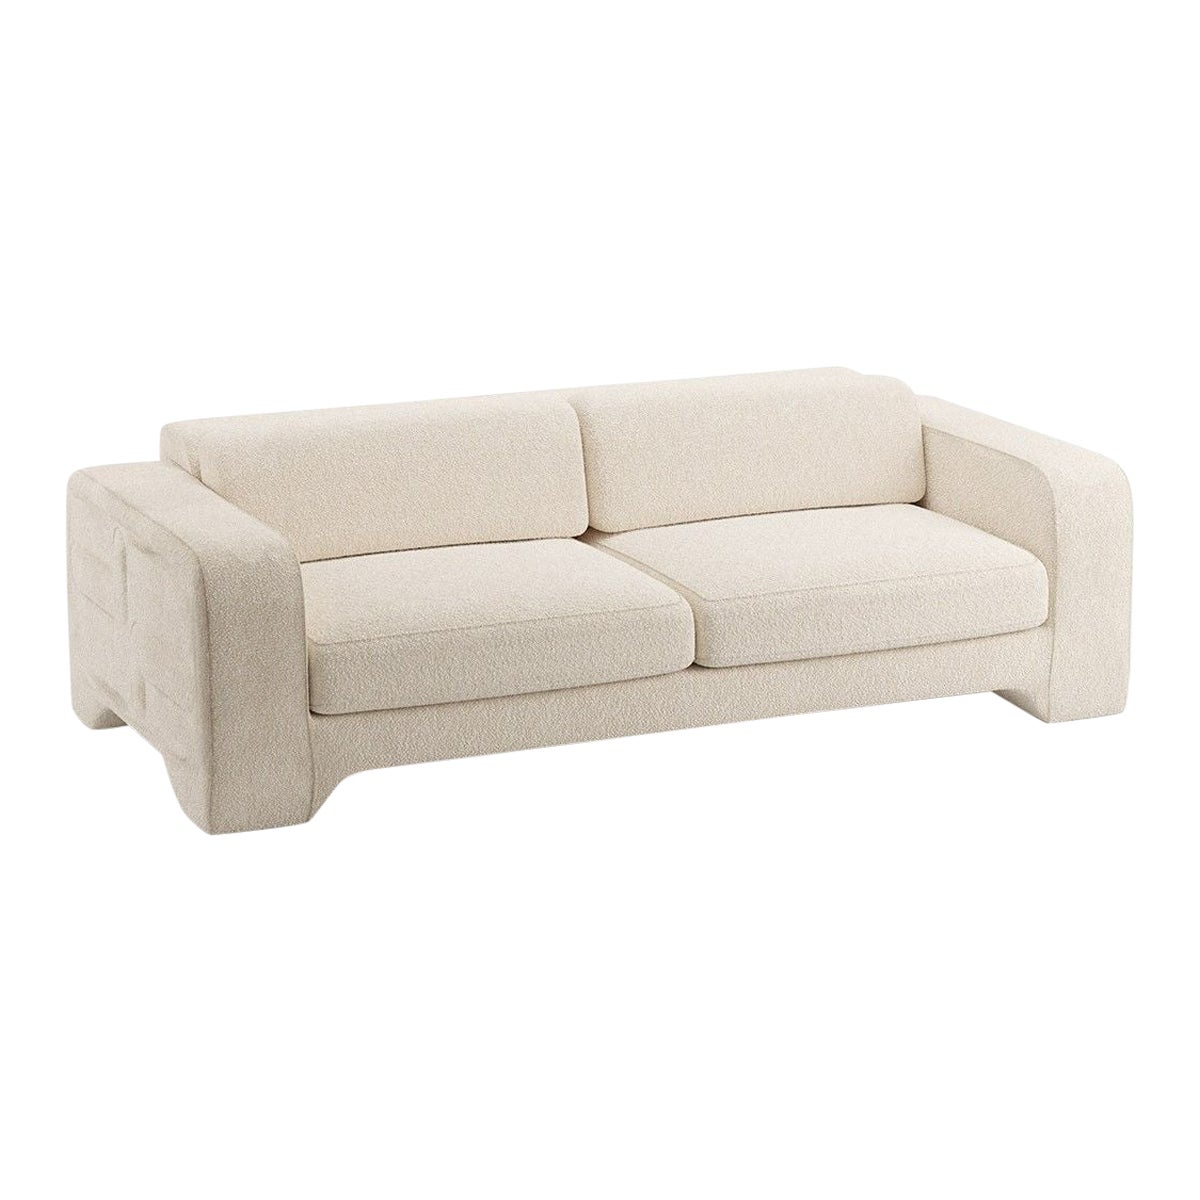 Popus Editions Giovanna 4 Seater Sofa in Natural Athena Loop Yarn Upholstery